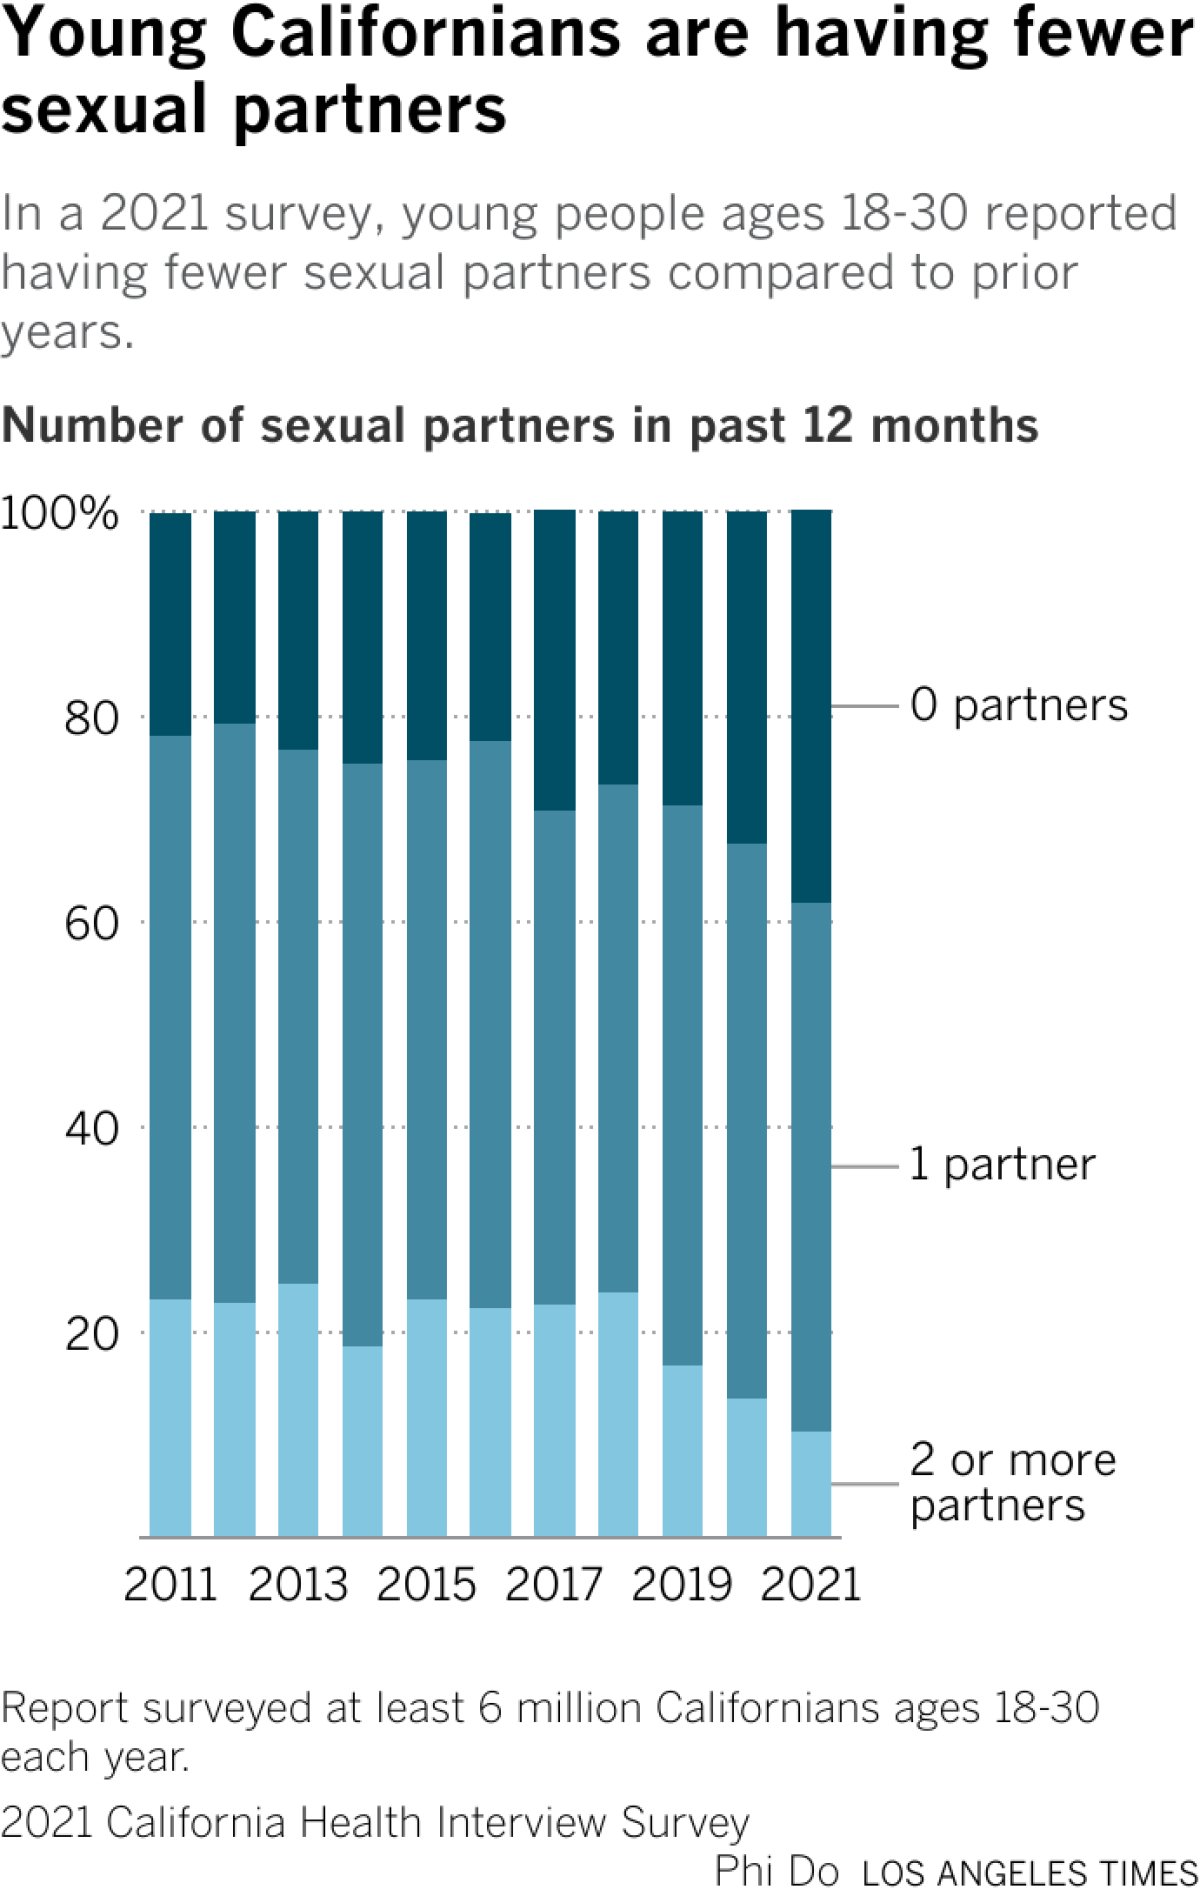 Stacked column chart showing how many sexual partners in the past 12 months Californians ages 18-30 had in each year. 